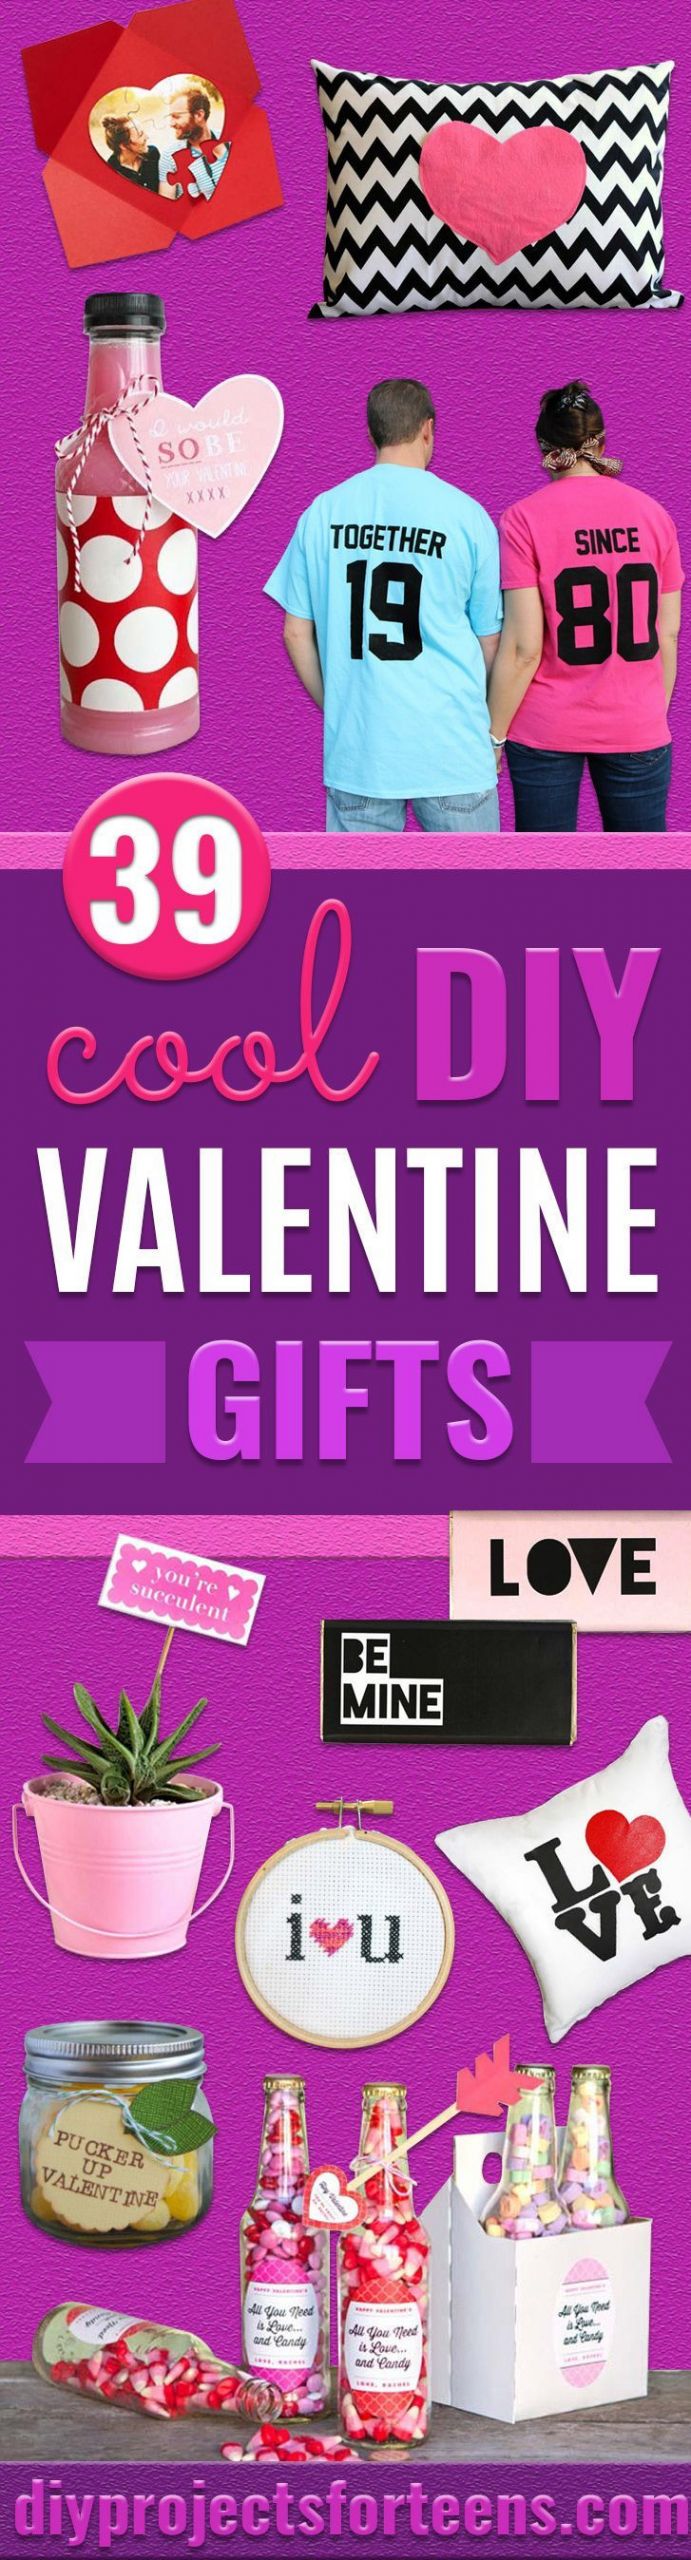 Valentine Gift Ideas For A Teenage Girl
 39 Cool DIY Valentine Gifts DIY Projects for Teens